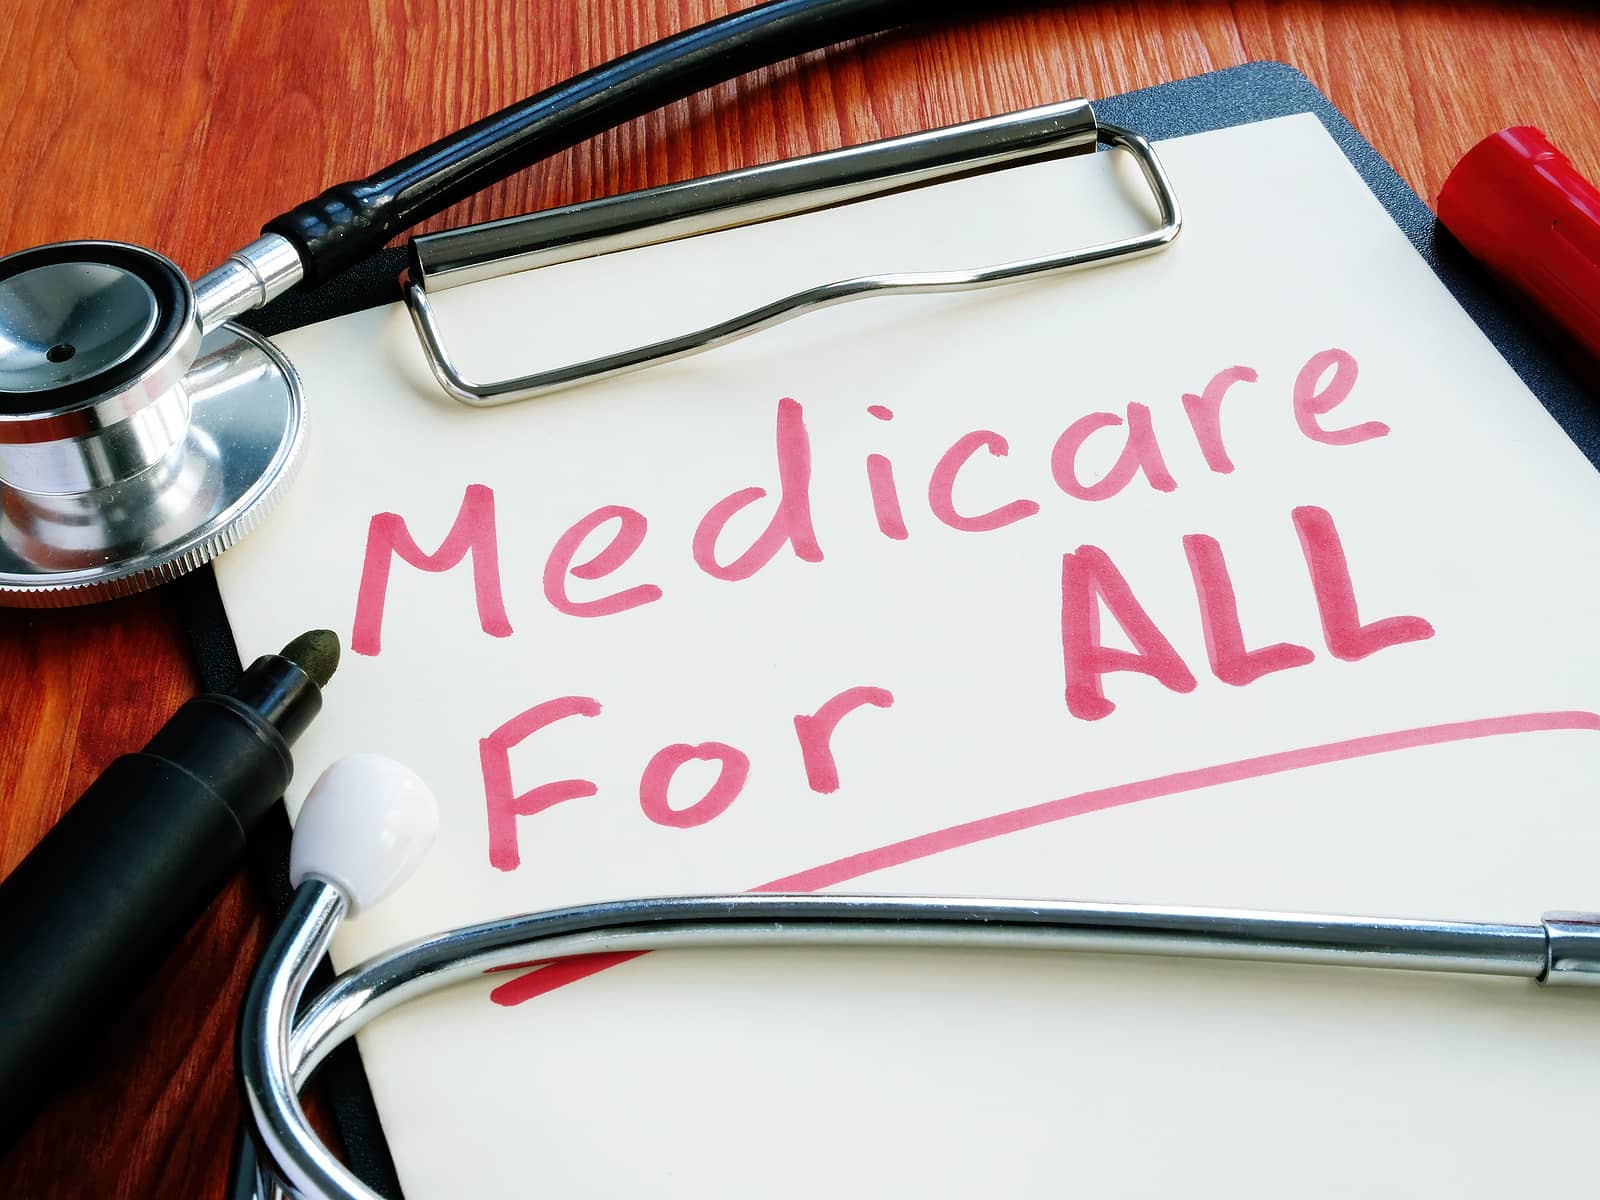 How will medicare for all change the current Medicare program